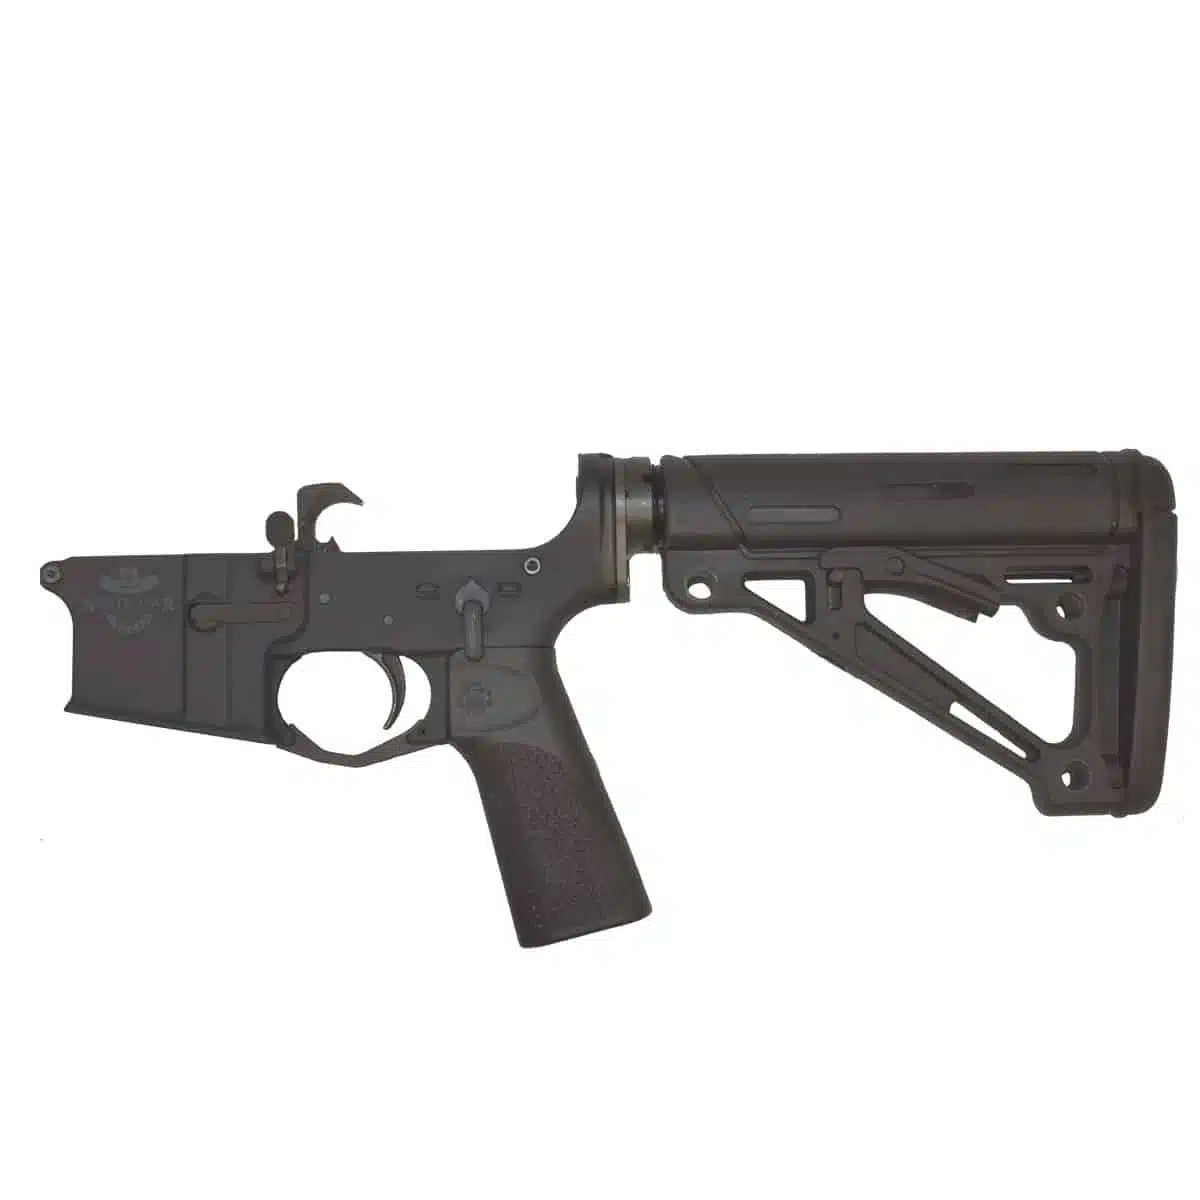 North Star Arms Complete Lower Receiver with Hogue furniture